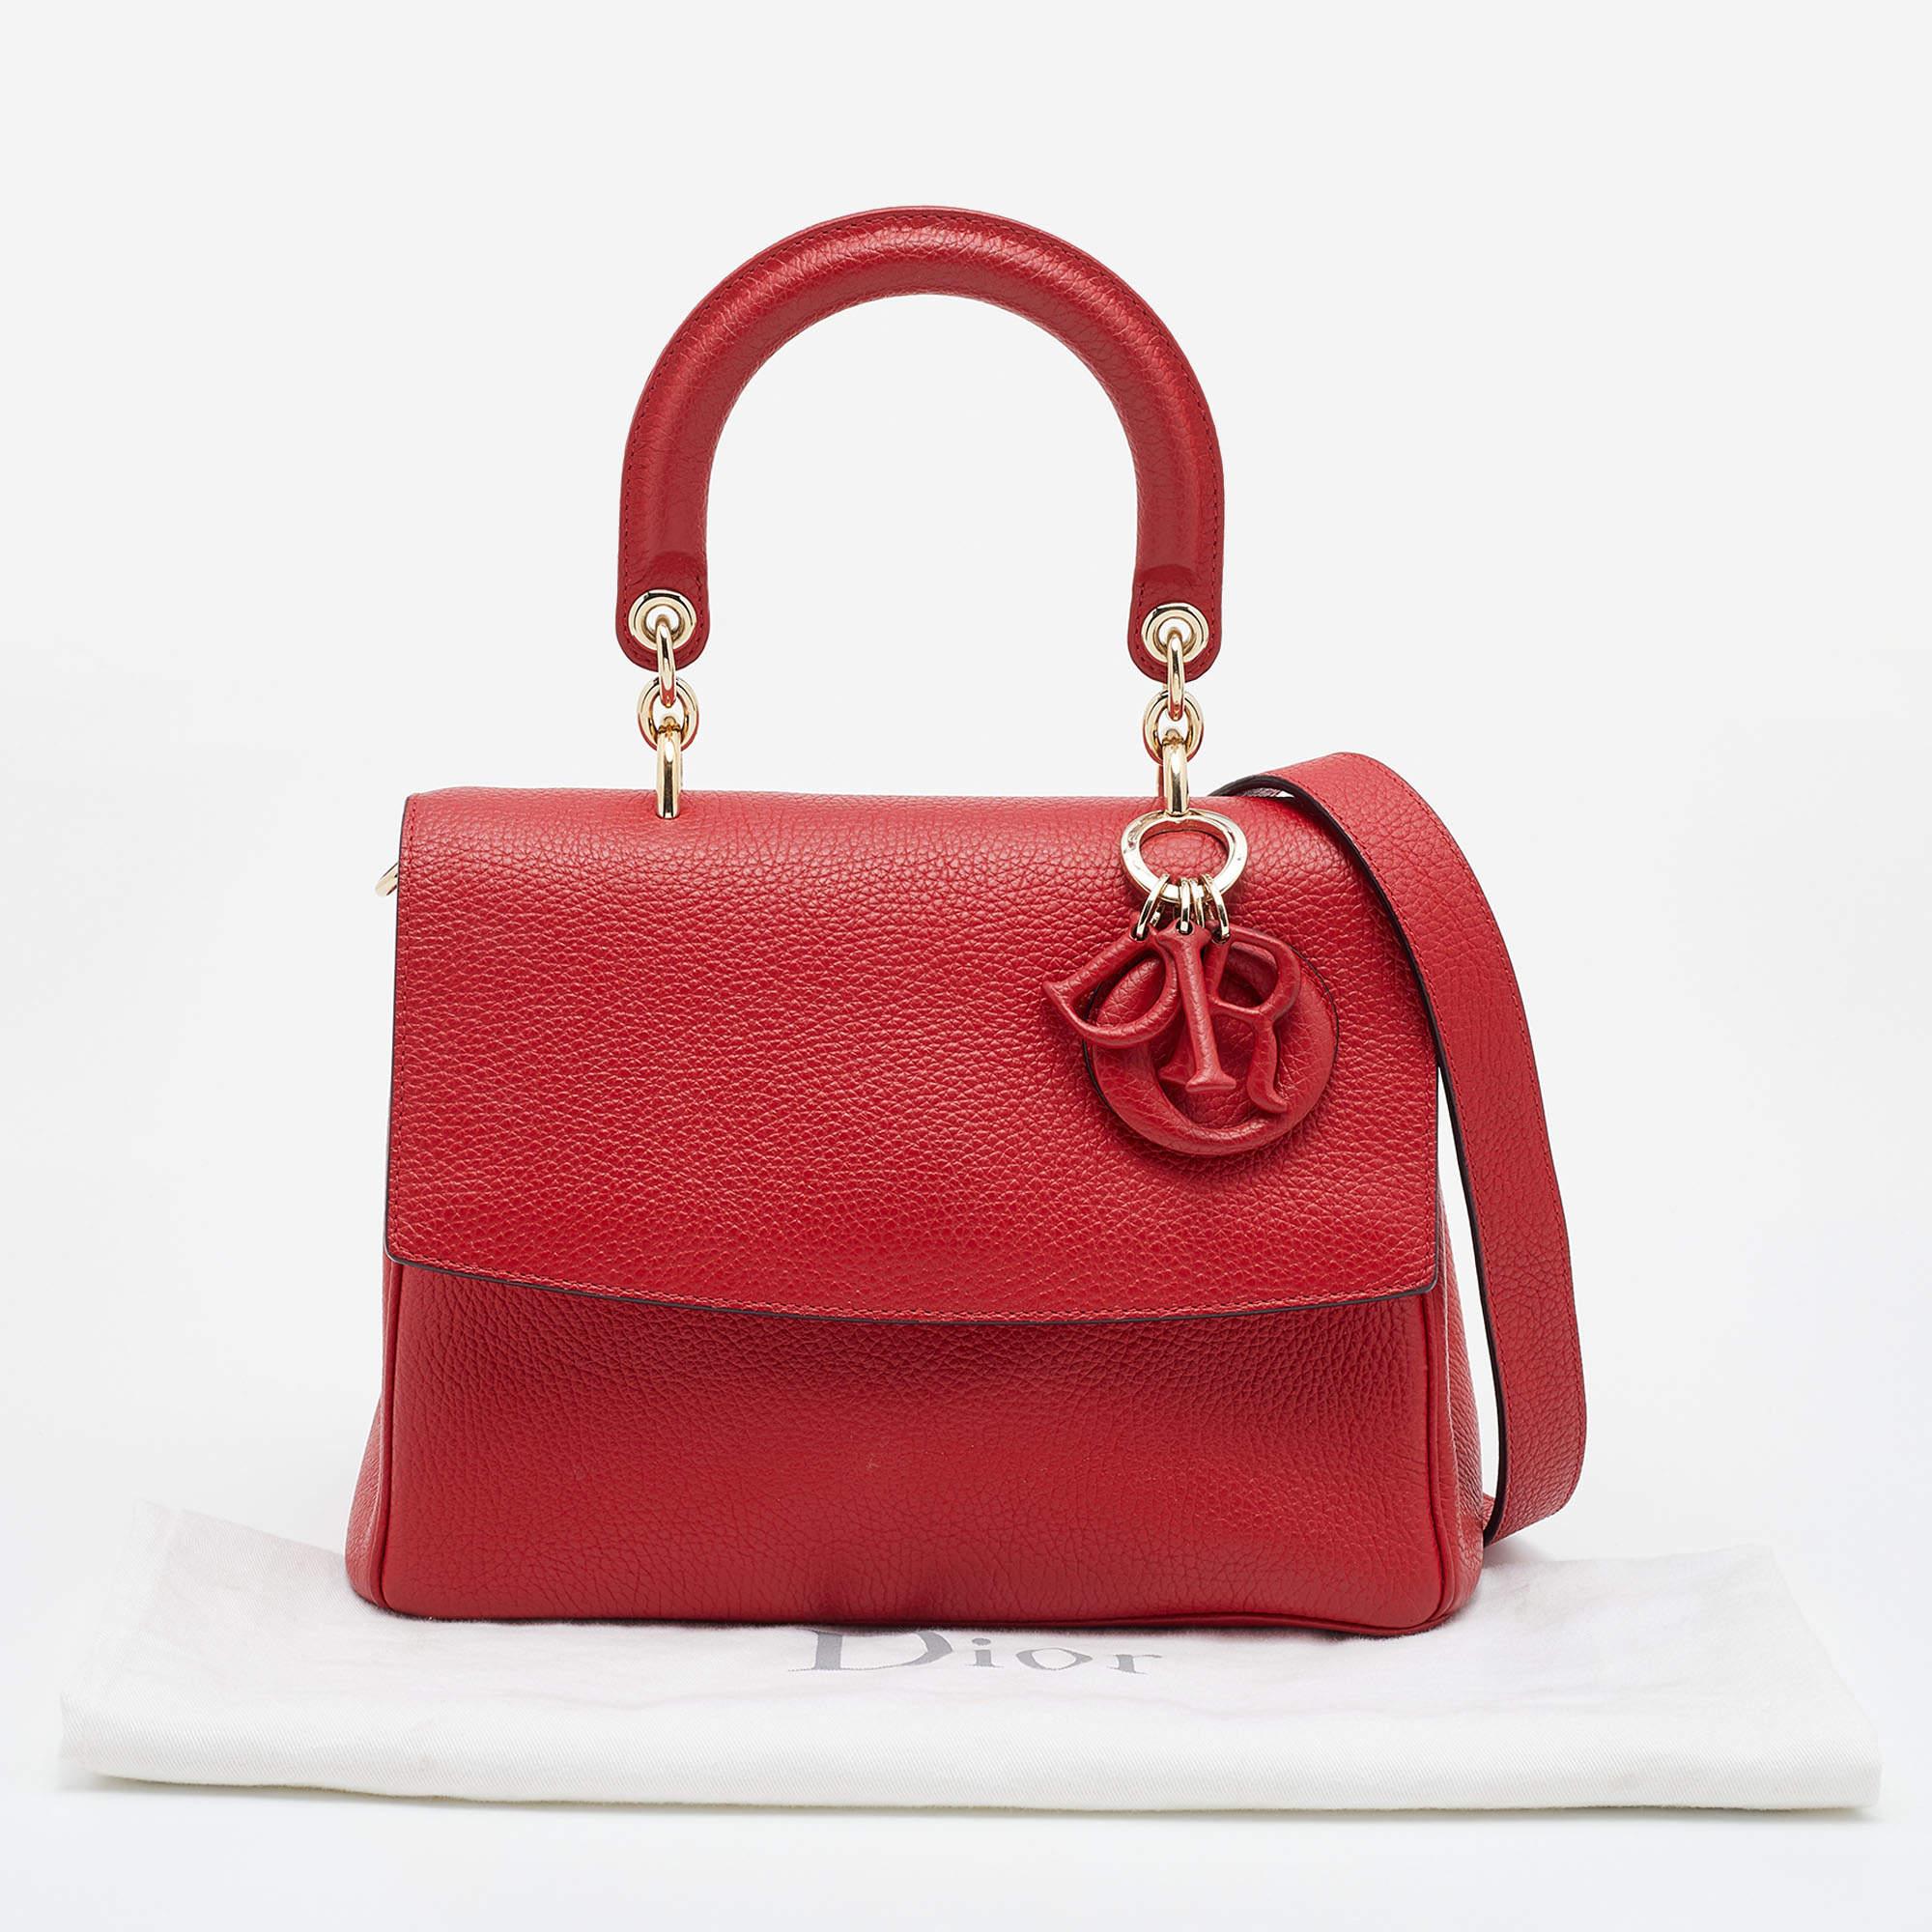 Dior Red Leather Small Be Dior Flap Top Handle Bag 9